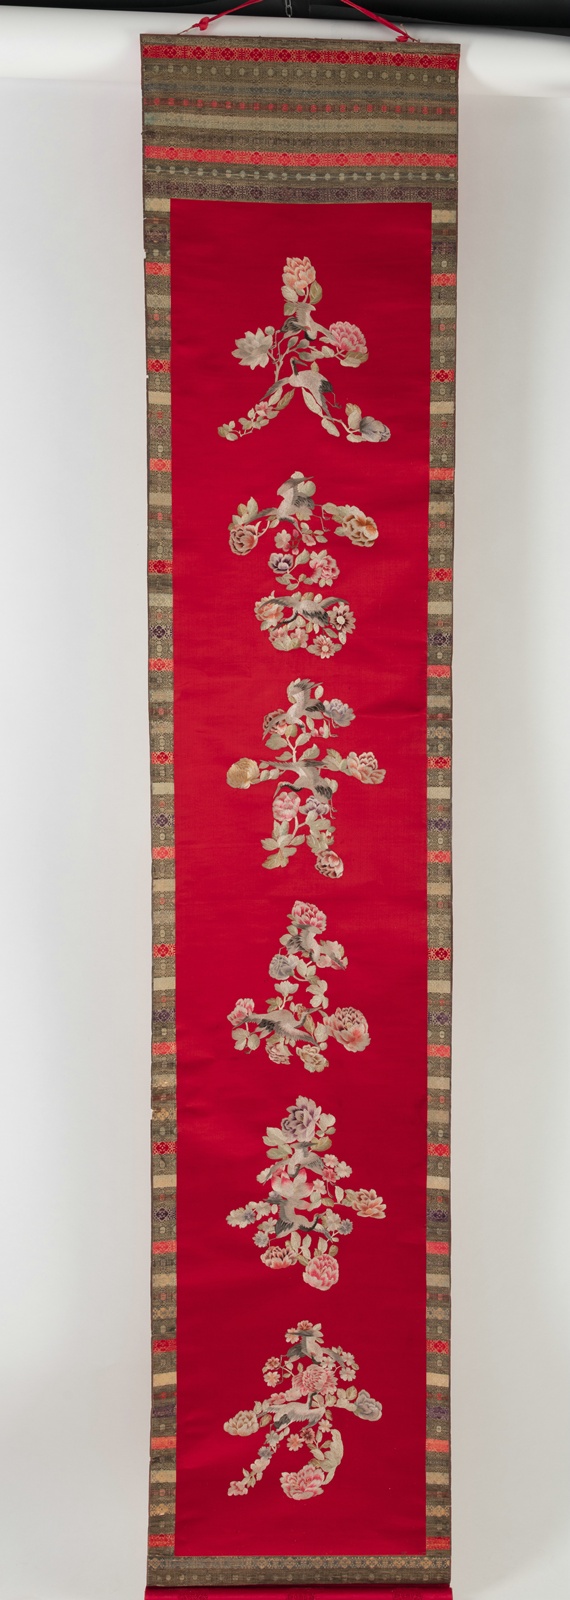 <b>AN EMBROIDERED CALLIGRAPHY WITH CRANES AND FLOWERS OF THE FOUR SEASONS</b>